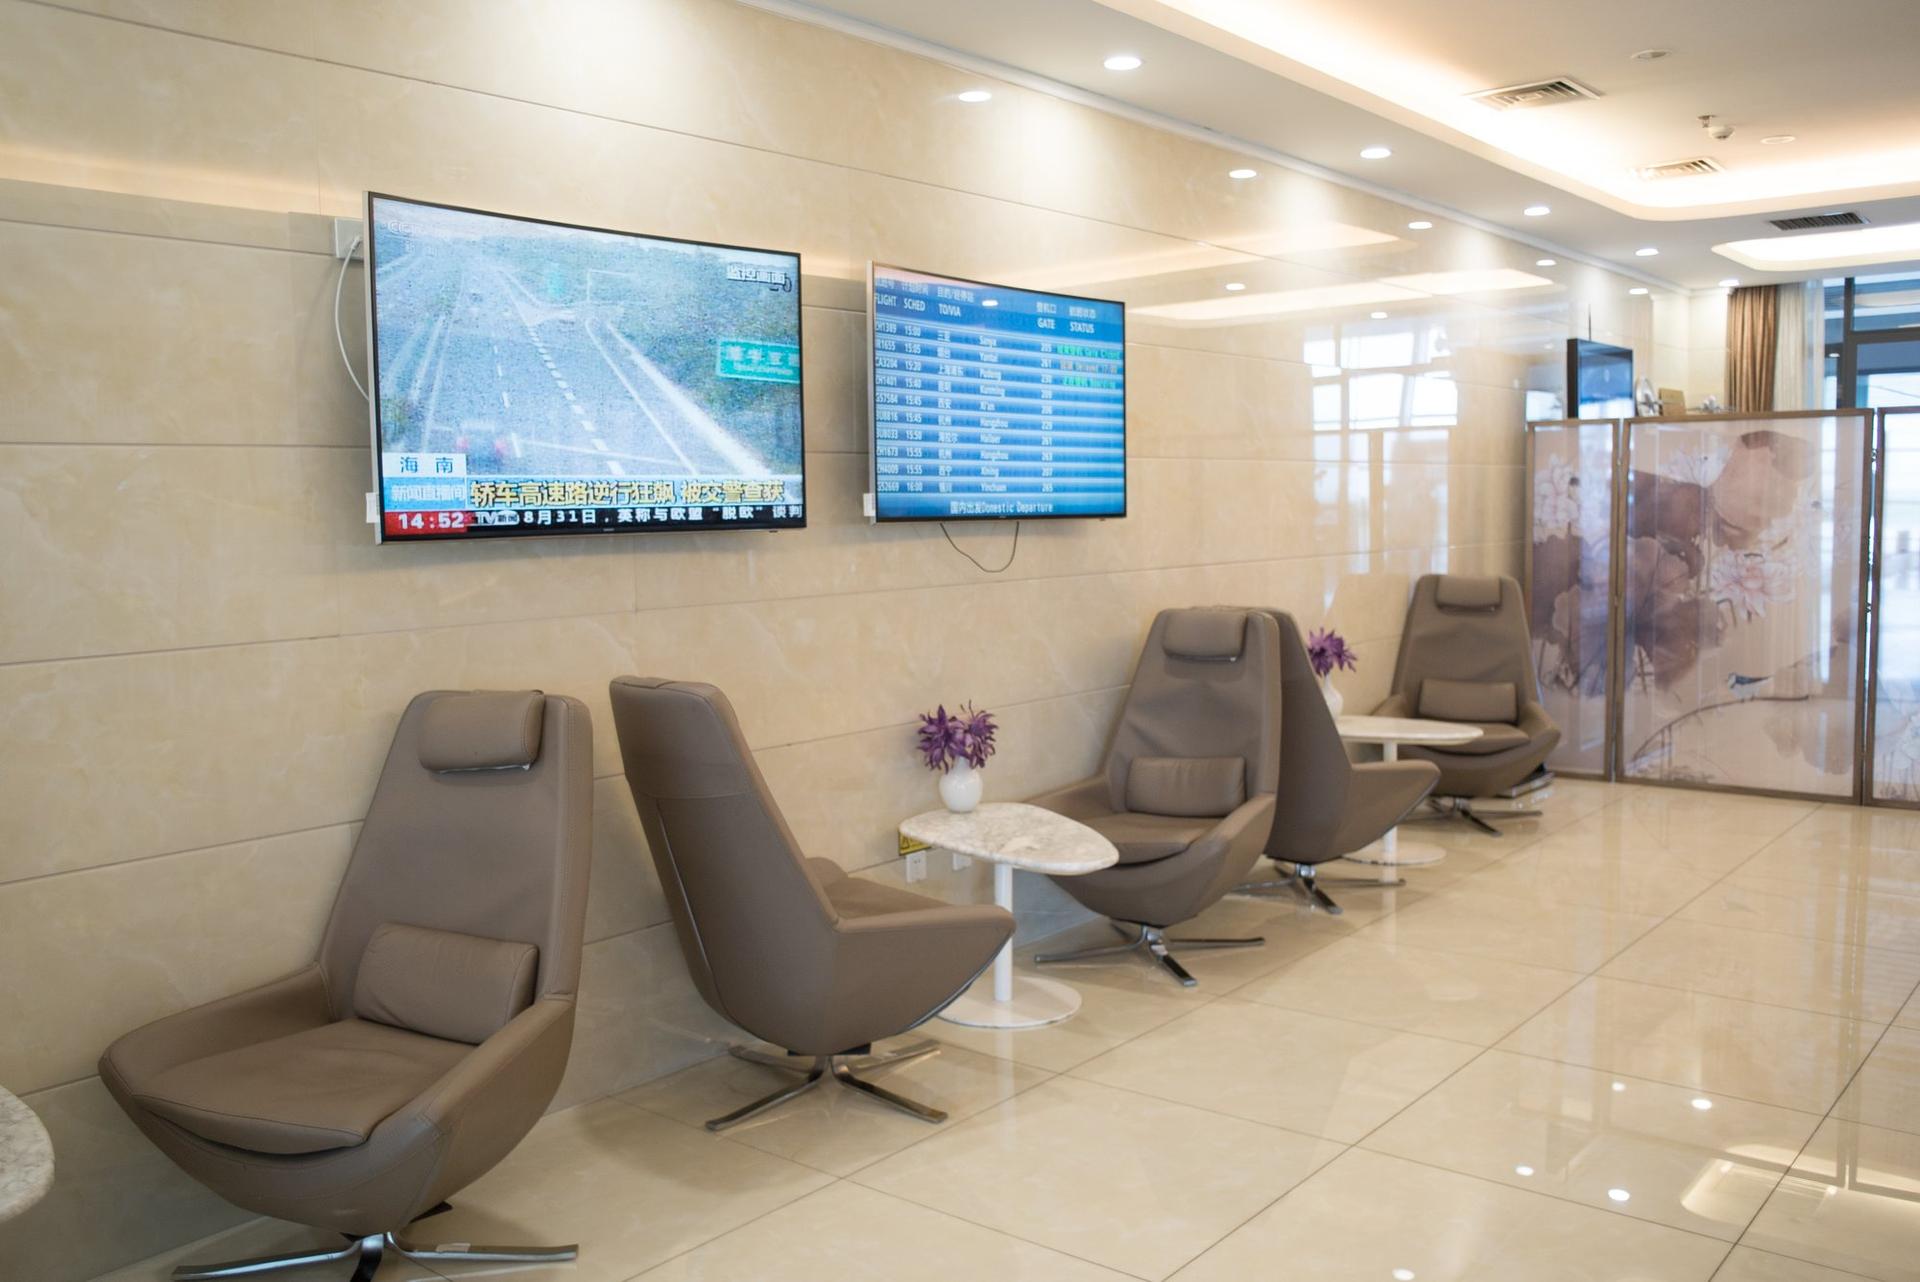 Tianjin Airlines Lounge image 1 of 13